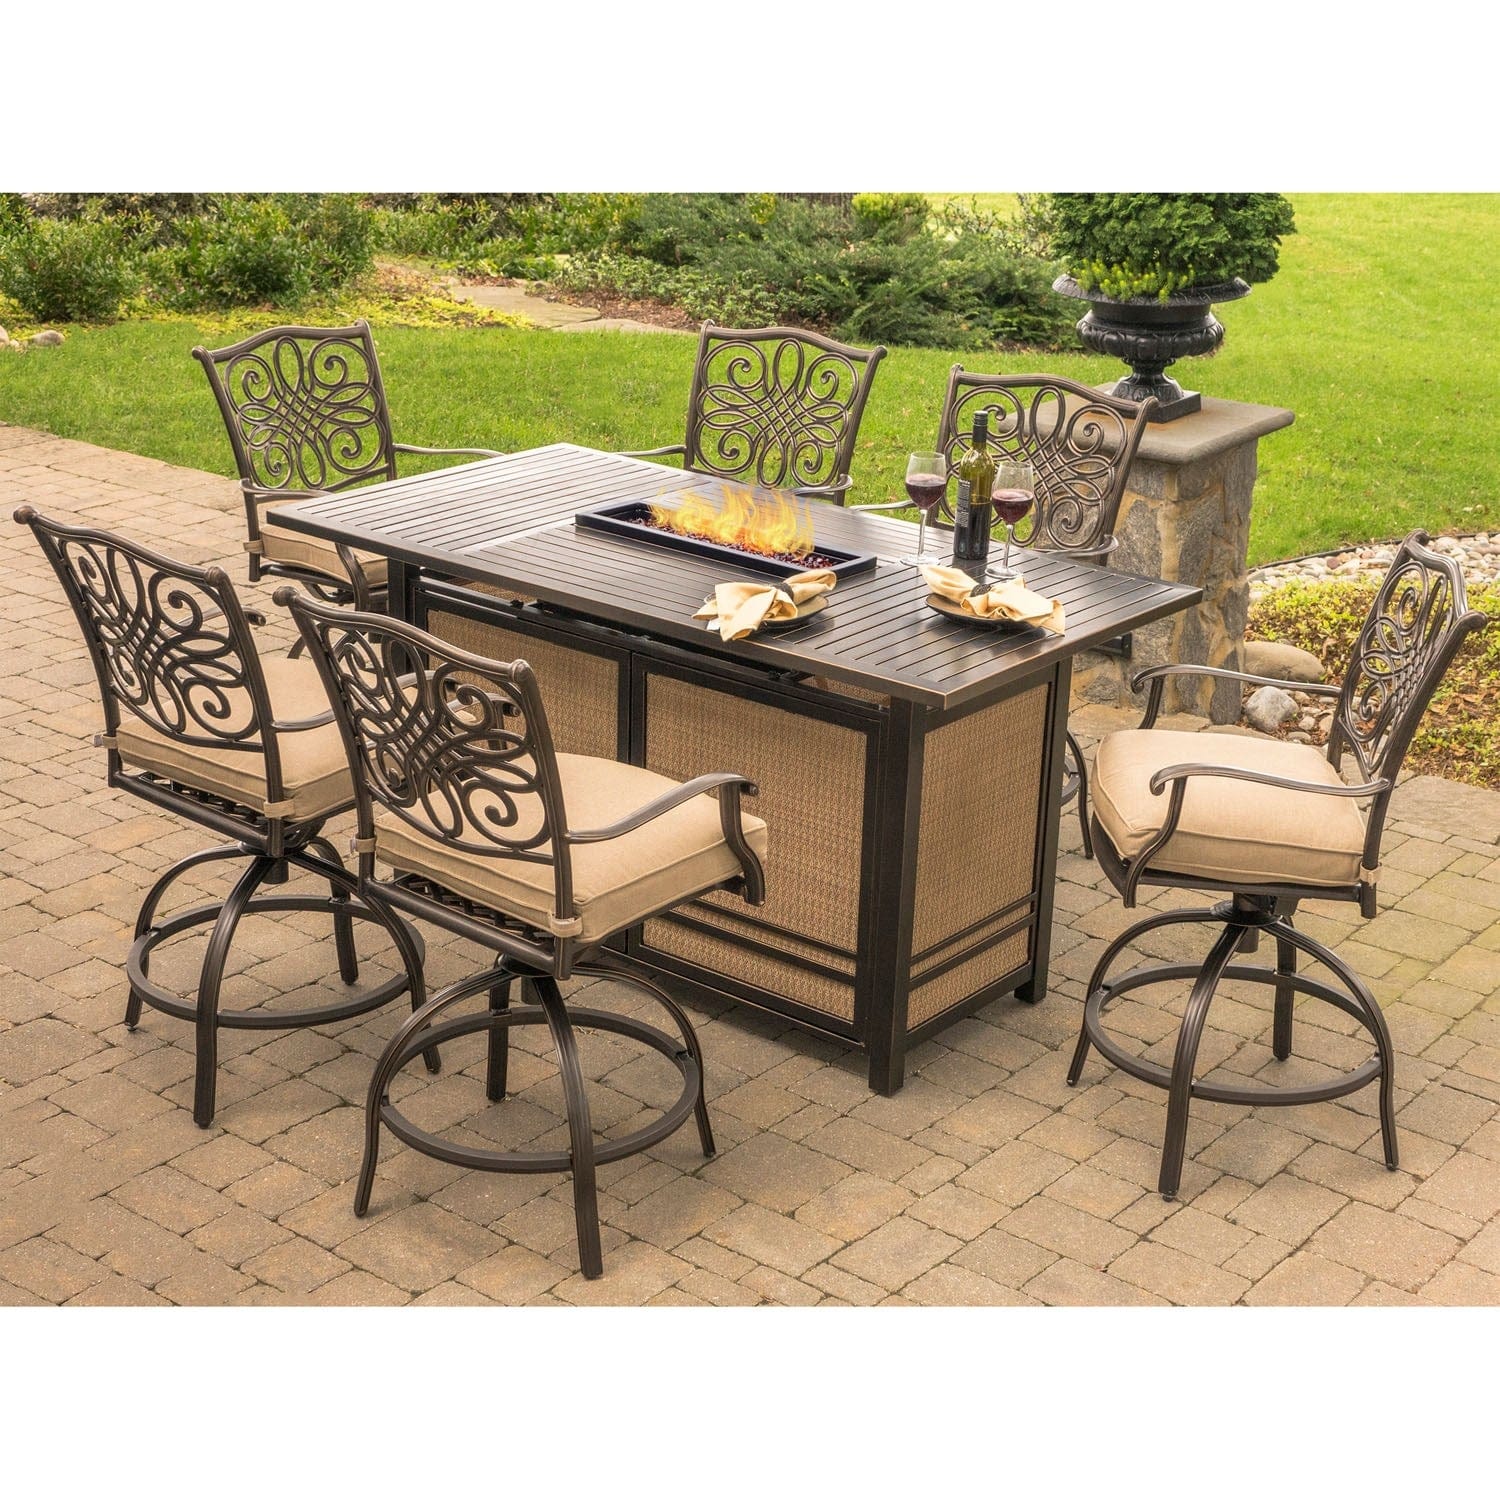 Hanover Fire Pit Dining Set Hanover - Traditions 7 Piece Aluminum Frame High Dining Set in Tan with 30,000 BTU Fire Pit Table | TRAD7PCFPBR